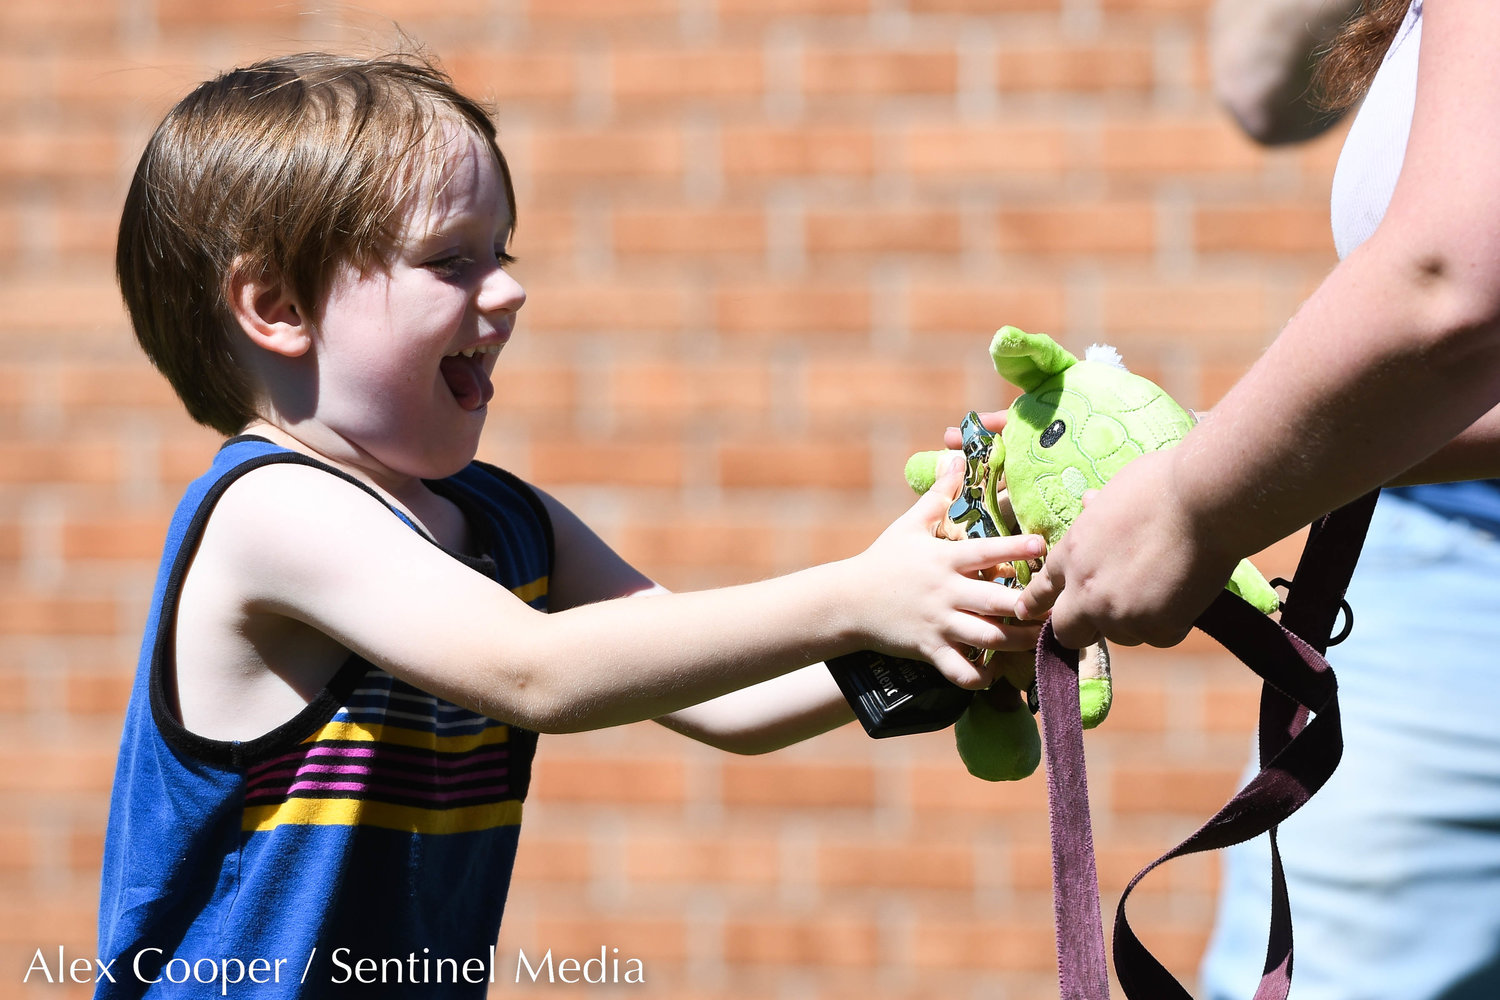 Dog toys and trophies were handed out to winners during a dog show hosted by the Herkimer County Humane Society on Saturday at Central Plaza in Ilion. The show was part of a long list of events hosted during Ilion Days 2022 from July 16-24.